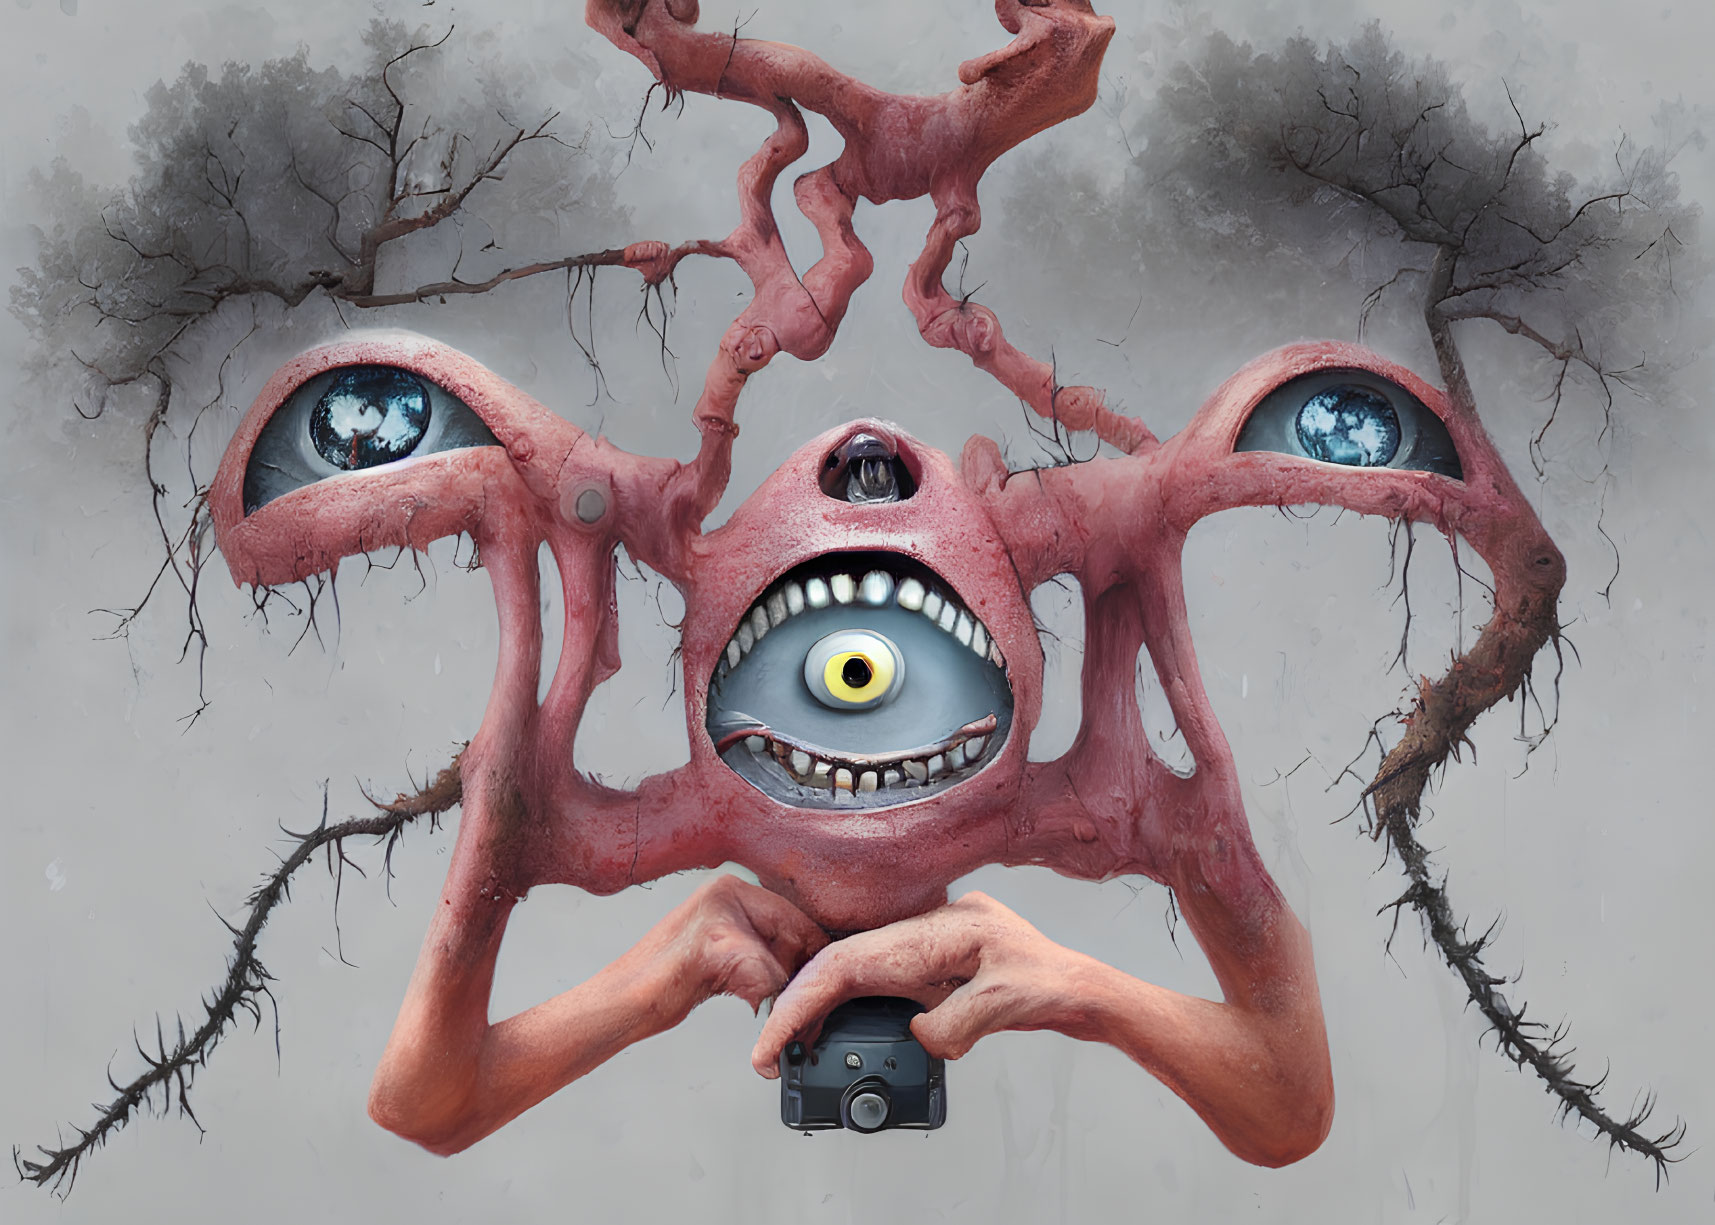 Surreal creature with multiple eyes and twisted tree branches for limbs on grey backdrop.